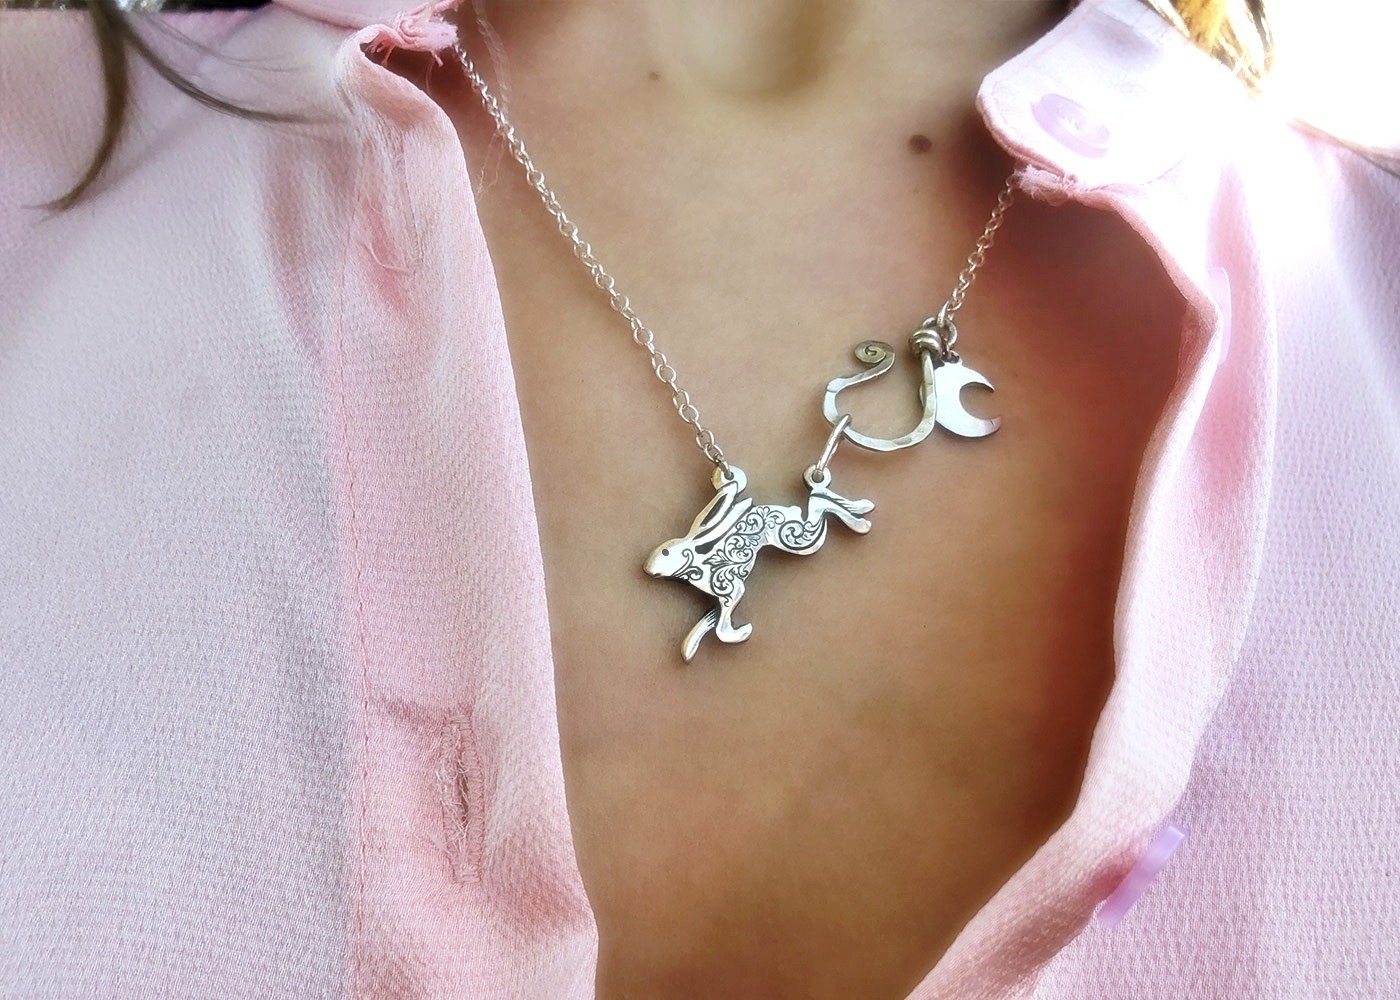 Leaping hare necklace handmade and recycled silver coin jewellery ethically handcrafted at an independant artisan studio workshop